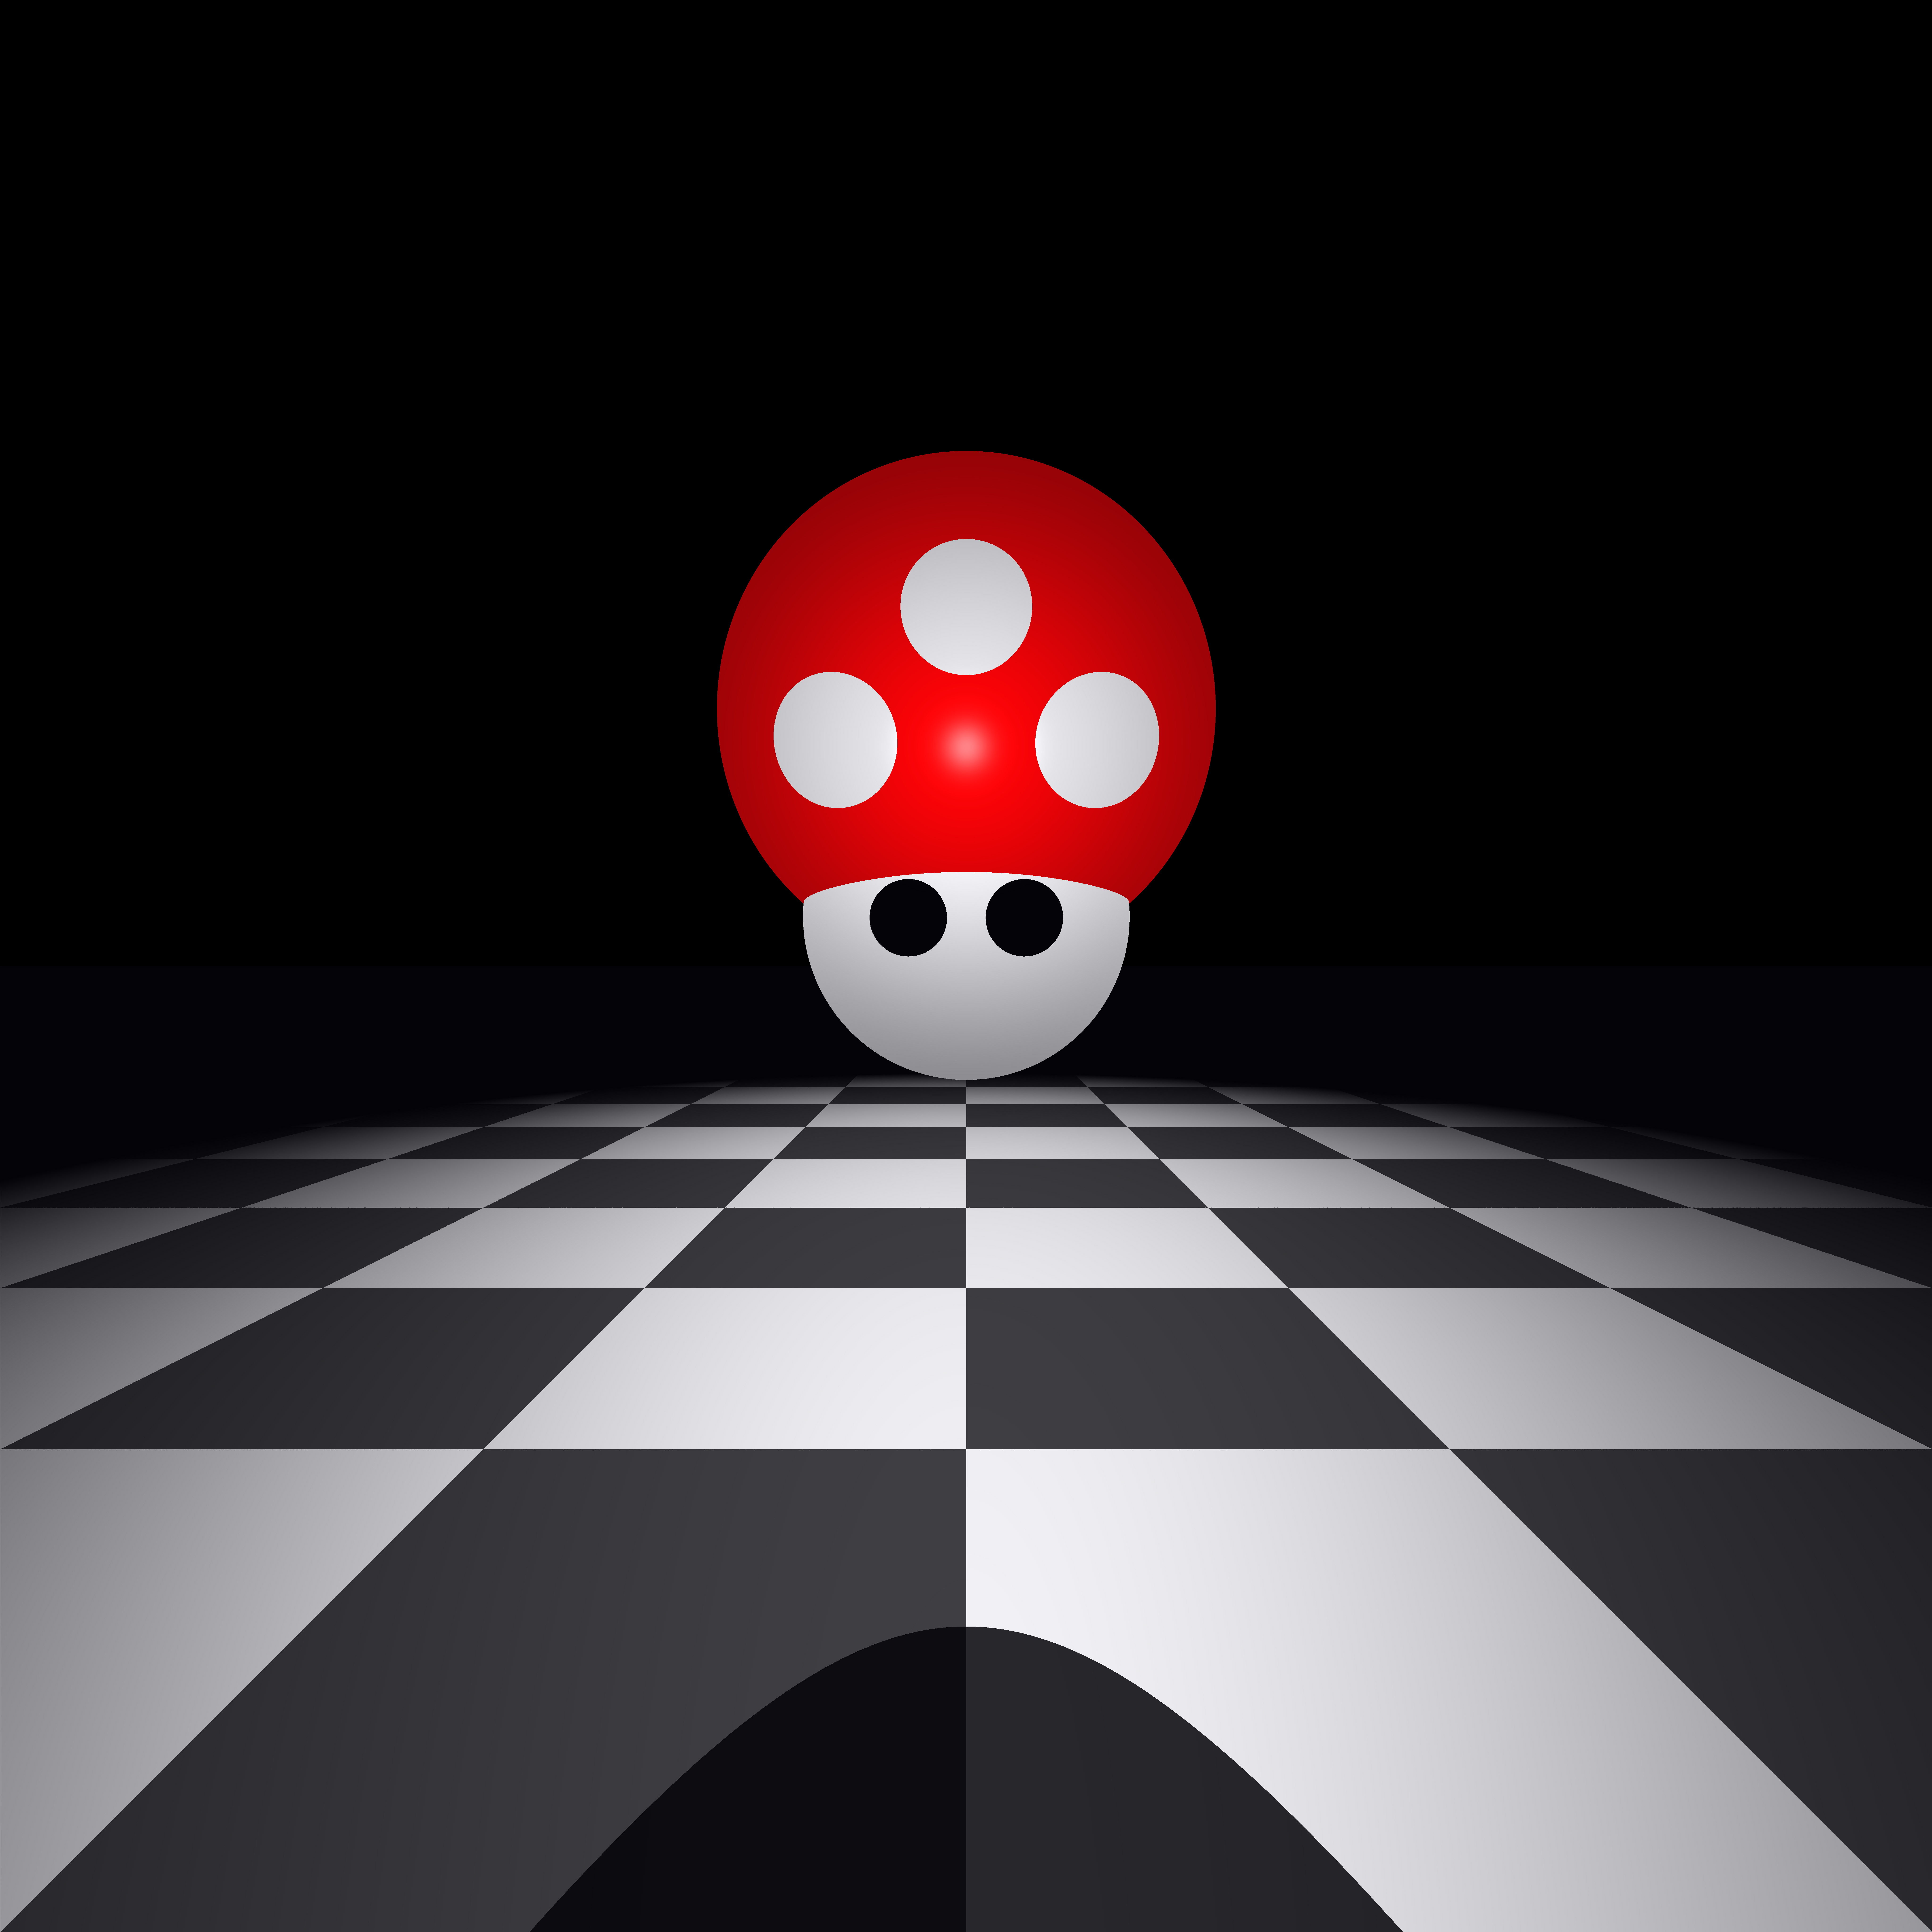 Here I abused the ray tracing renderer and I made a Mario Mushroom.